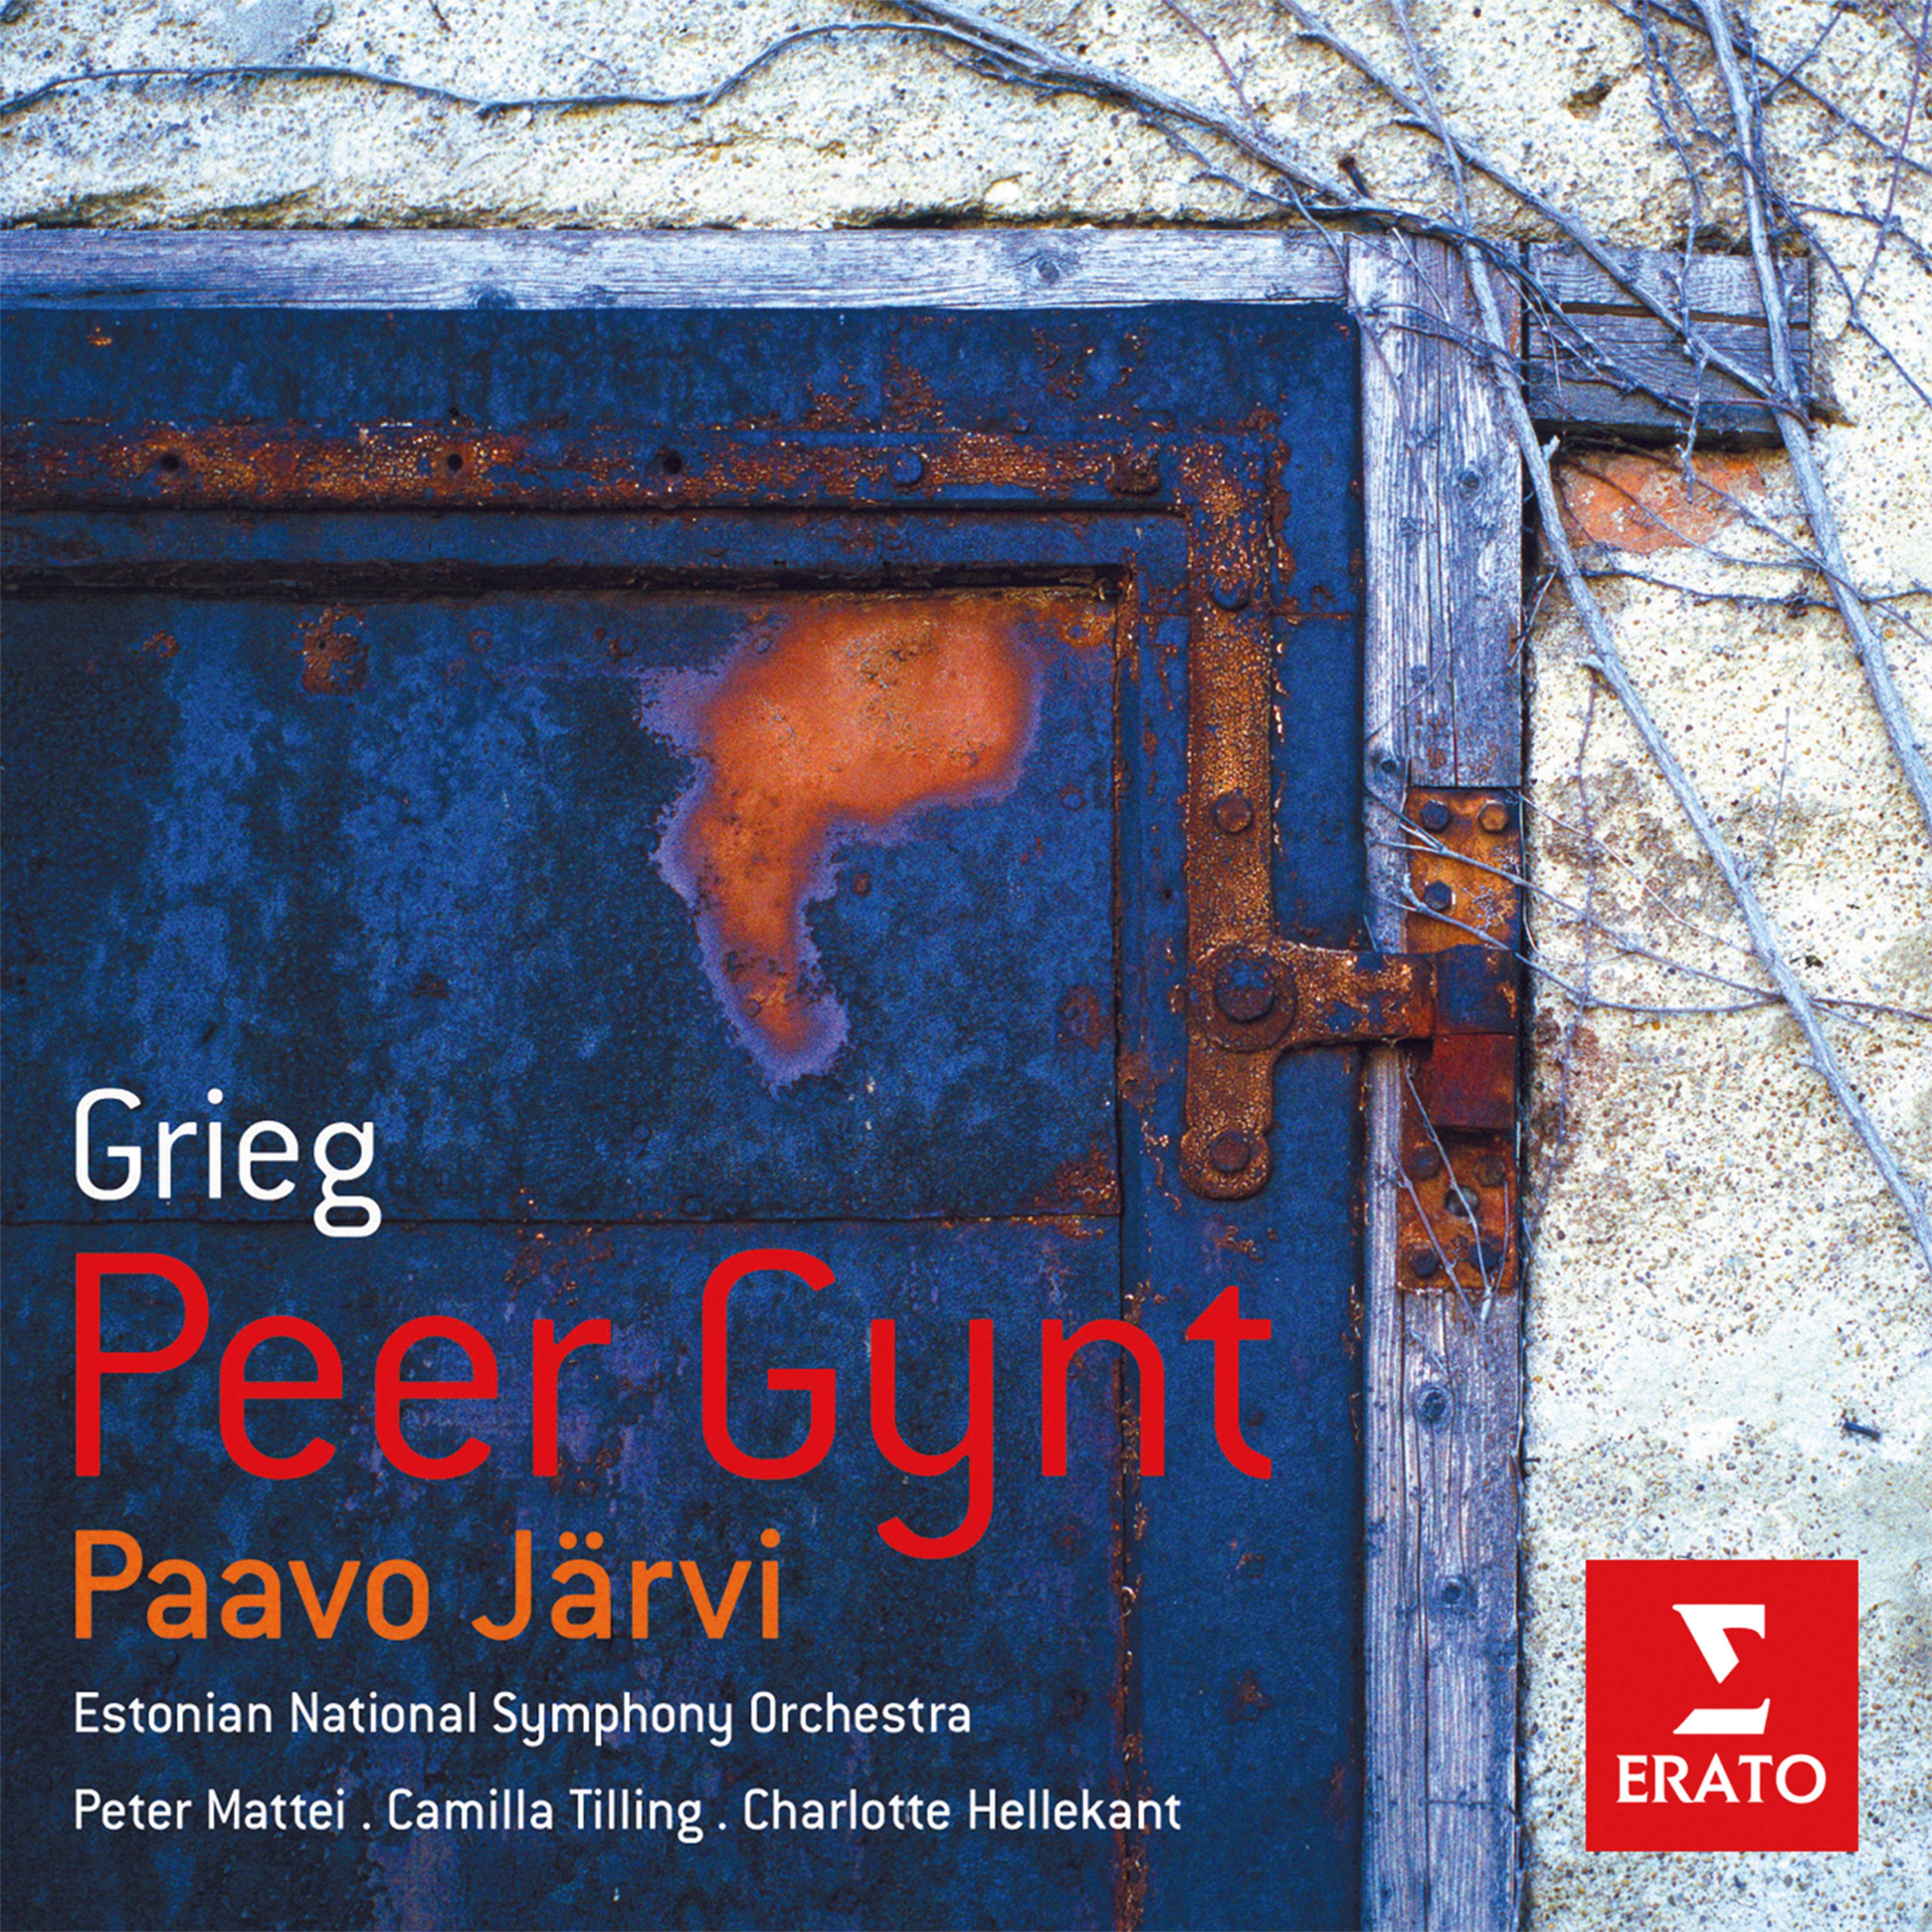 Peer Gynt, Op. 23, Act V:No. 26, Solveig's Cradle Song